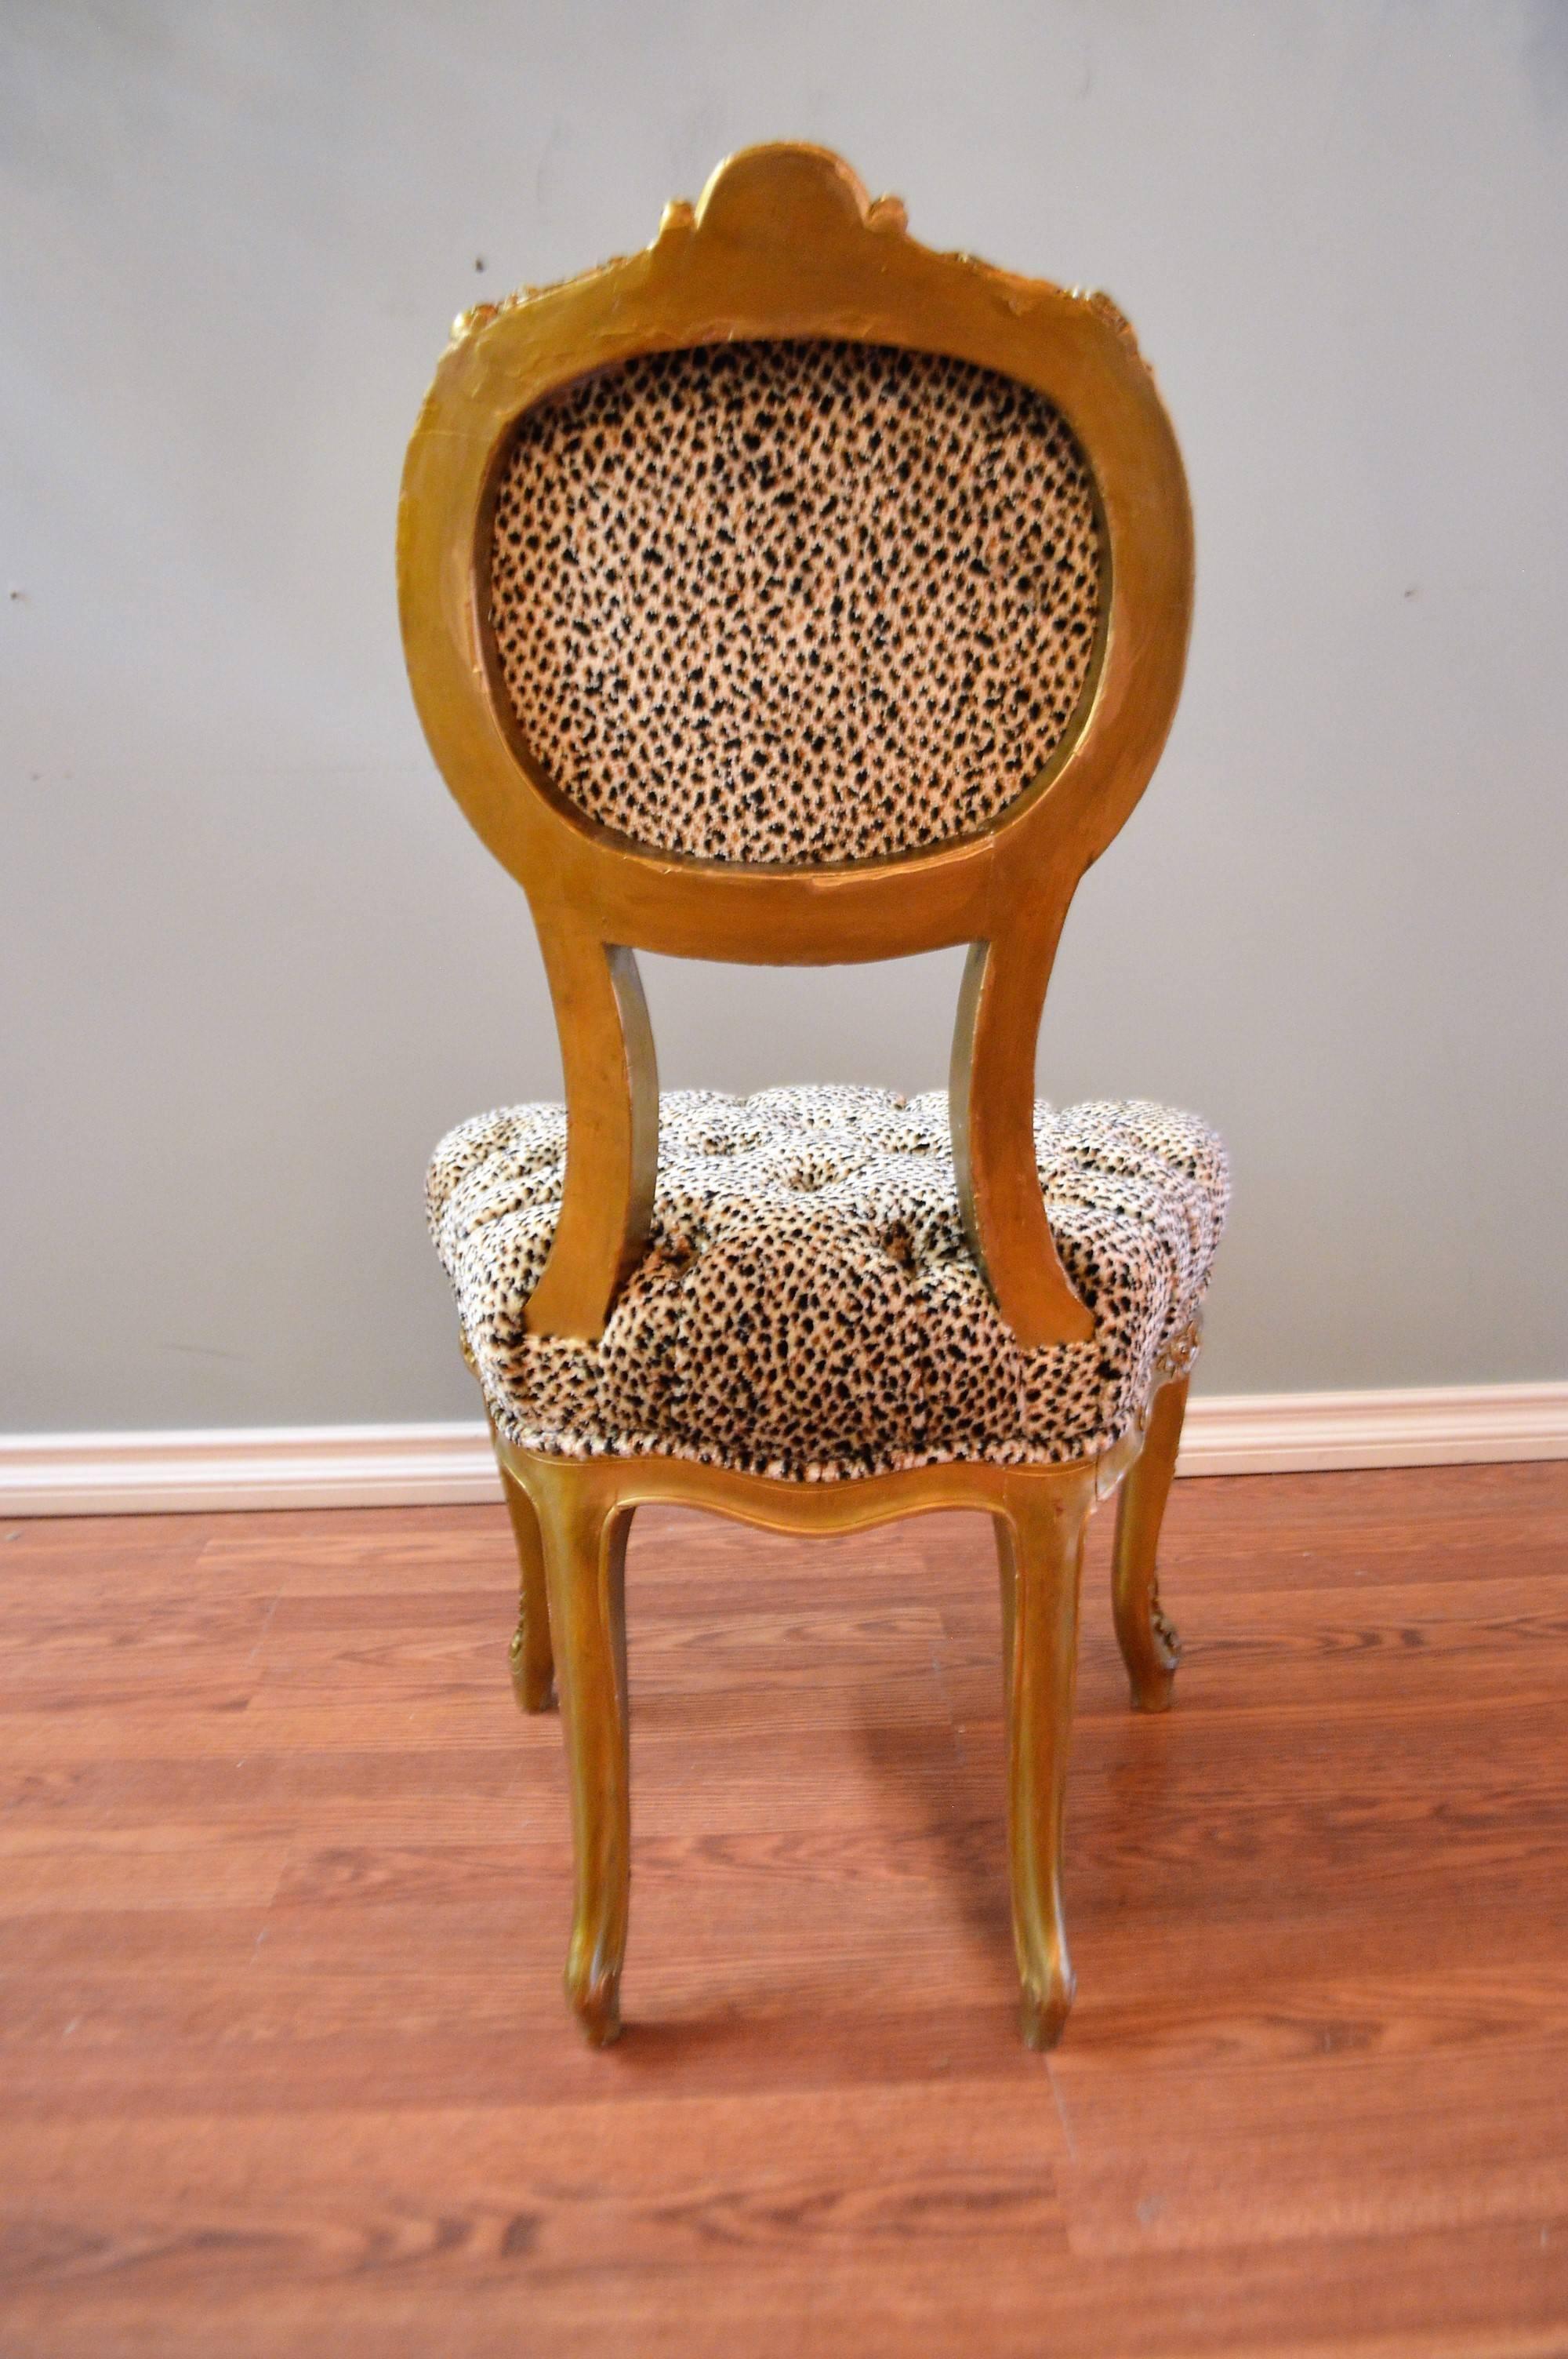 Chenille Pair of Louis XV Style Gilded Side Chairs, Upholstered in Leopard Type Fabric